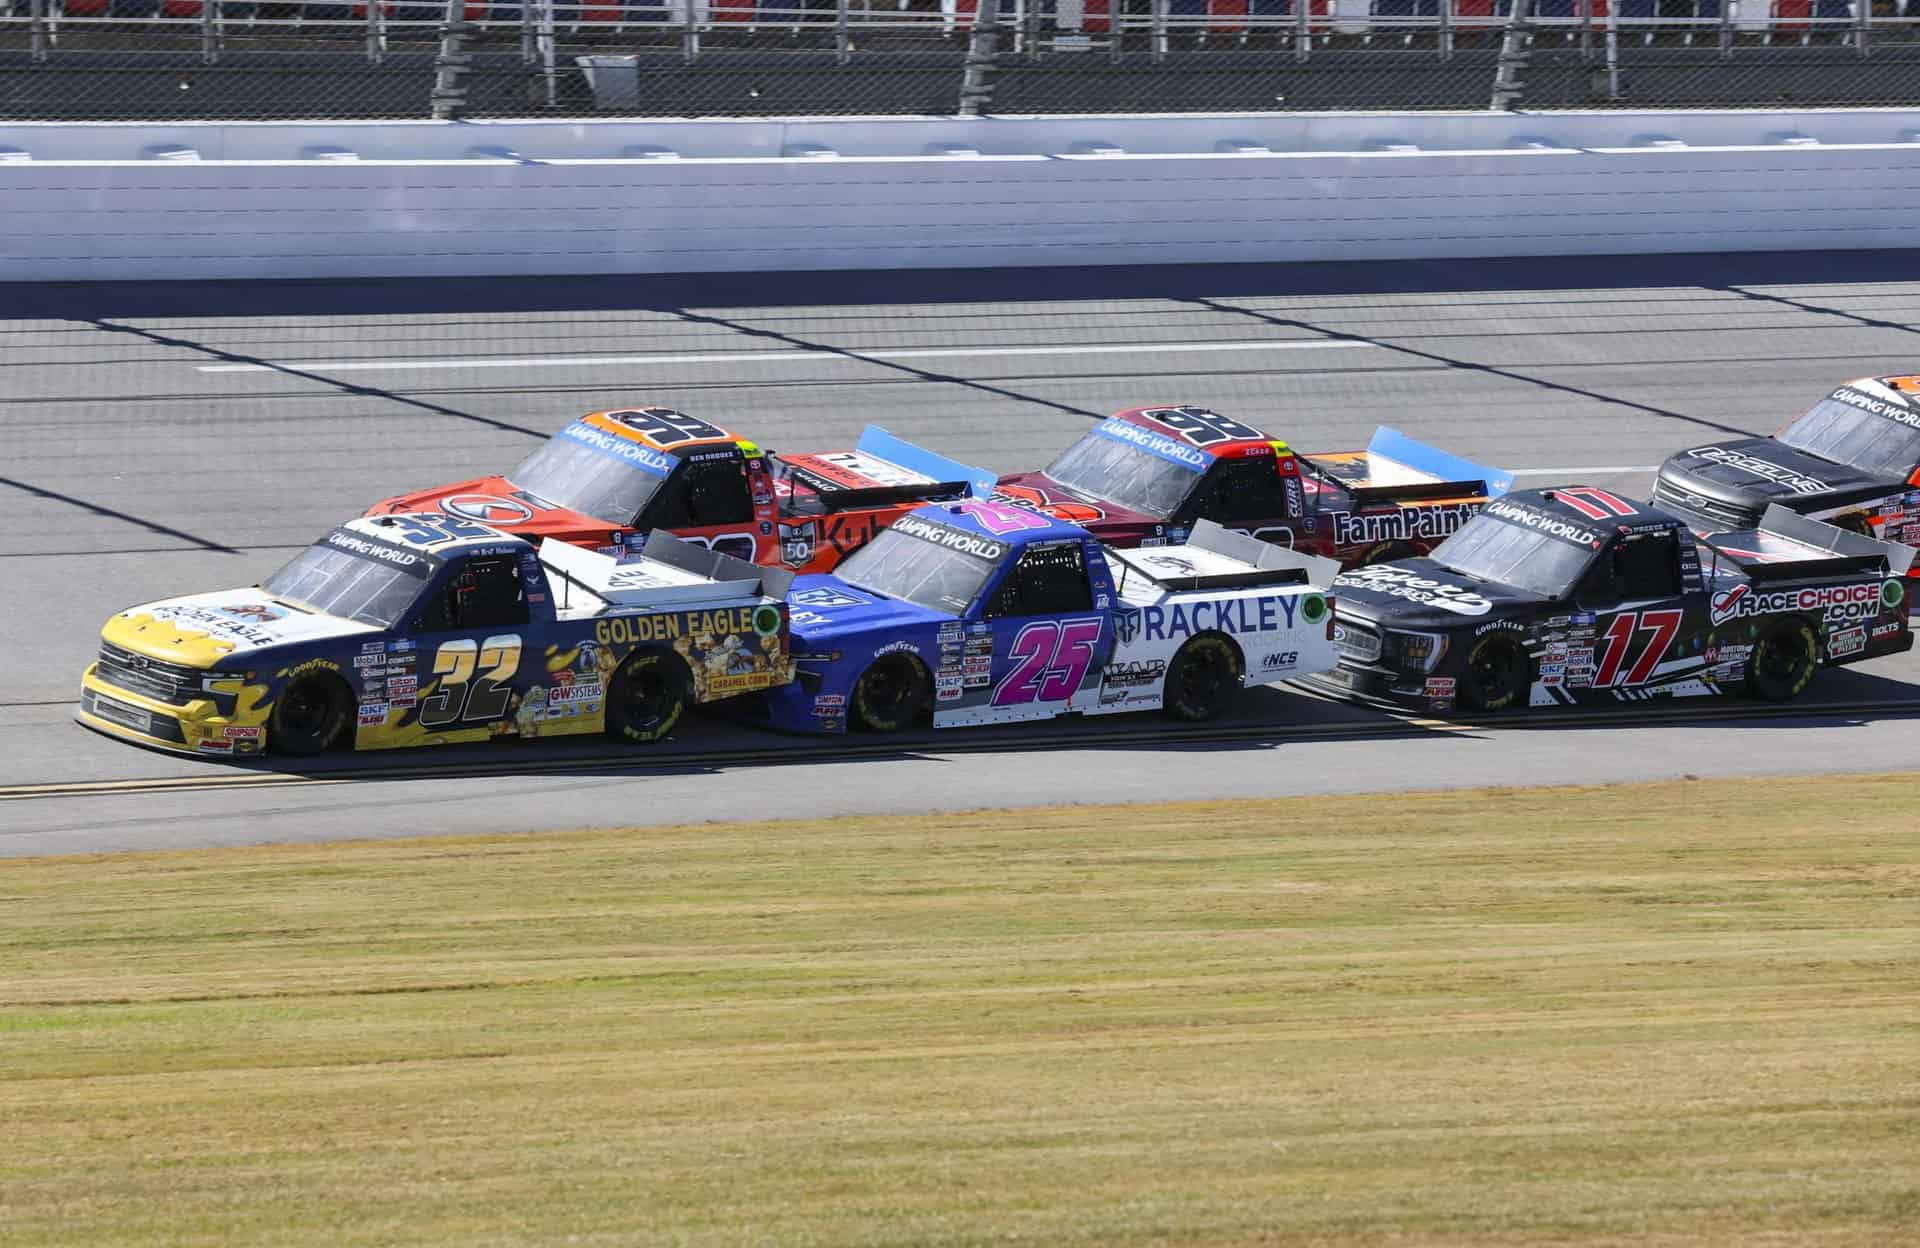 Bret Holmes leads the field at Talladega.